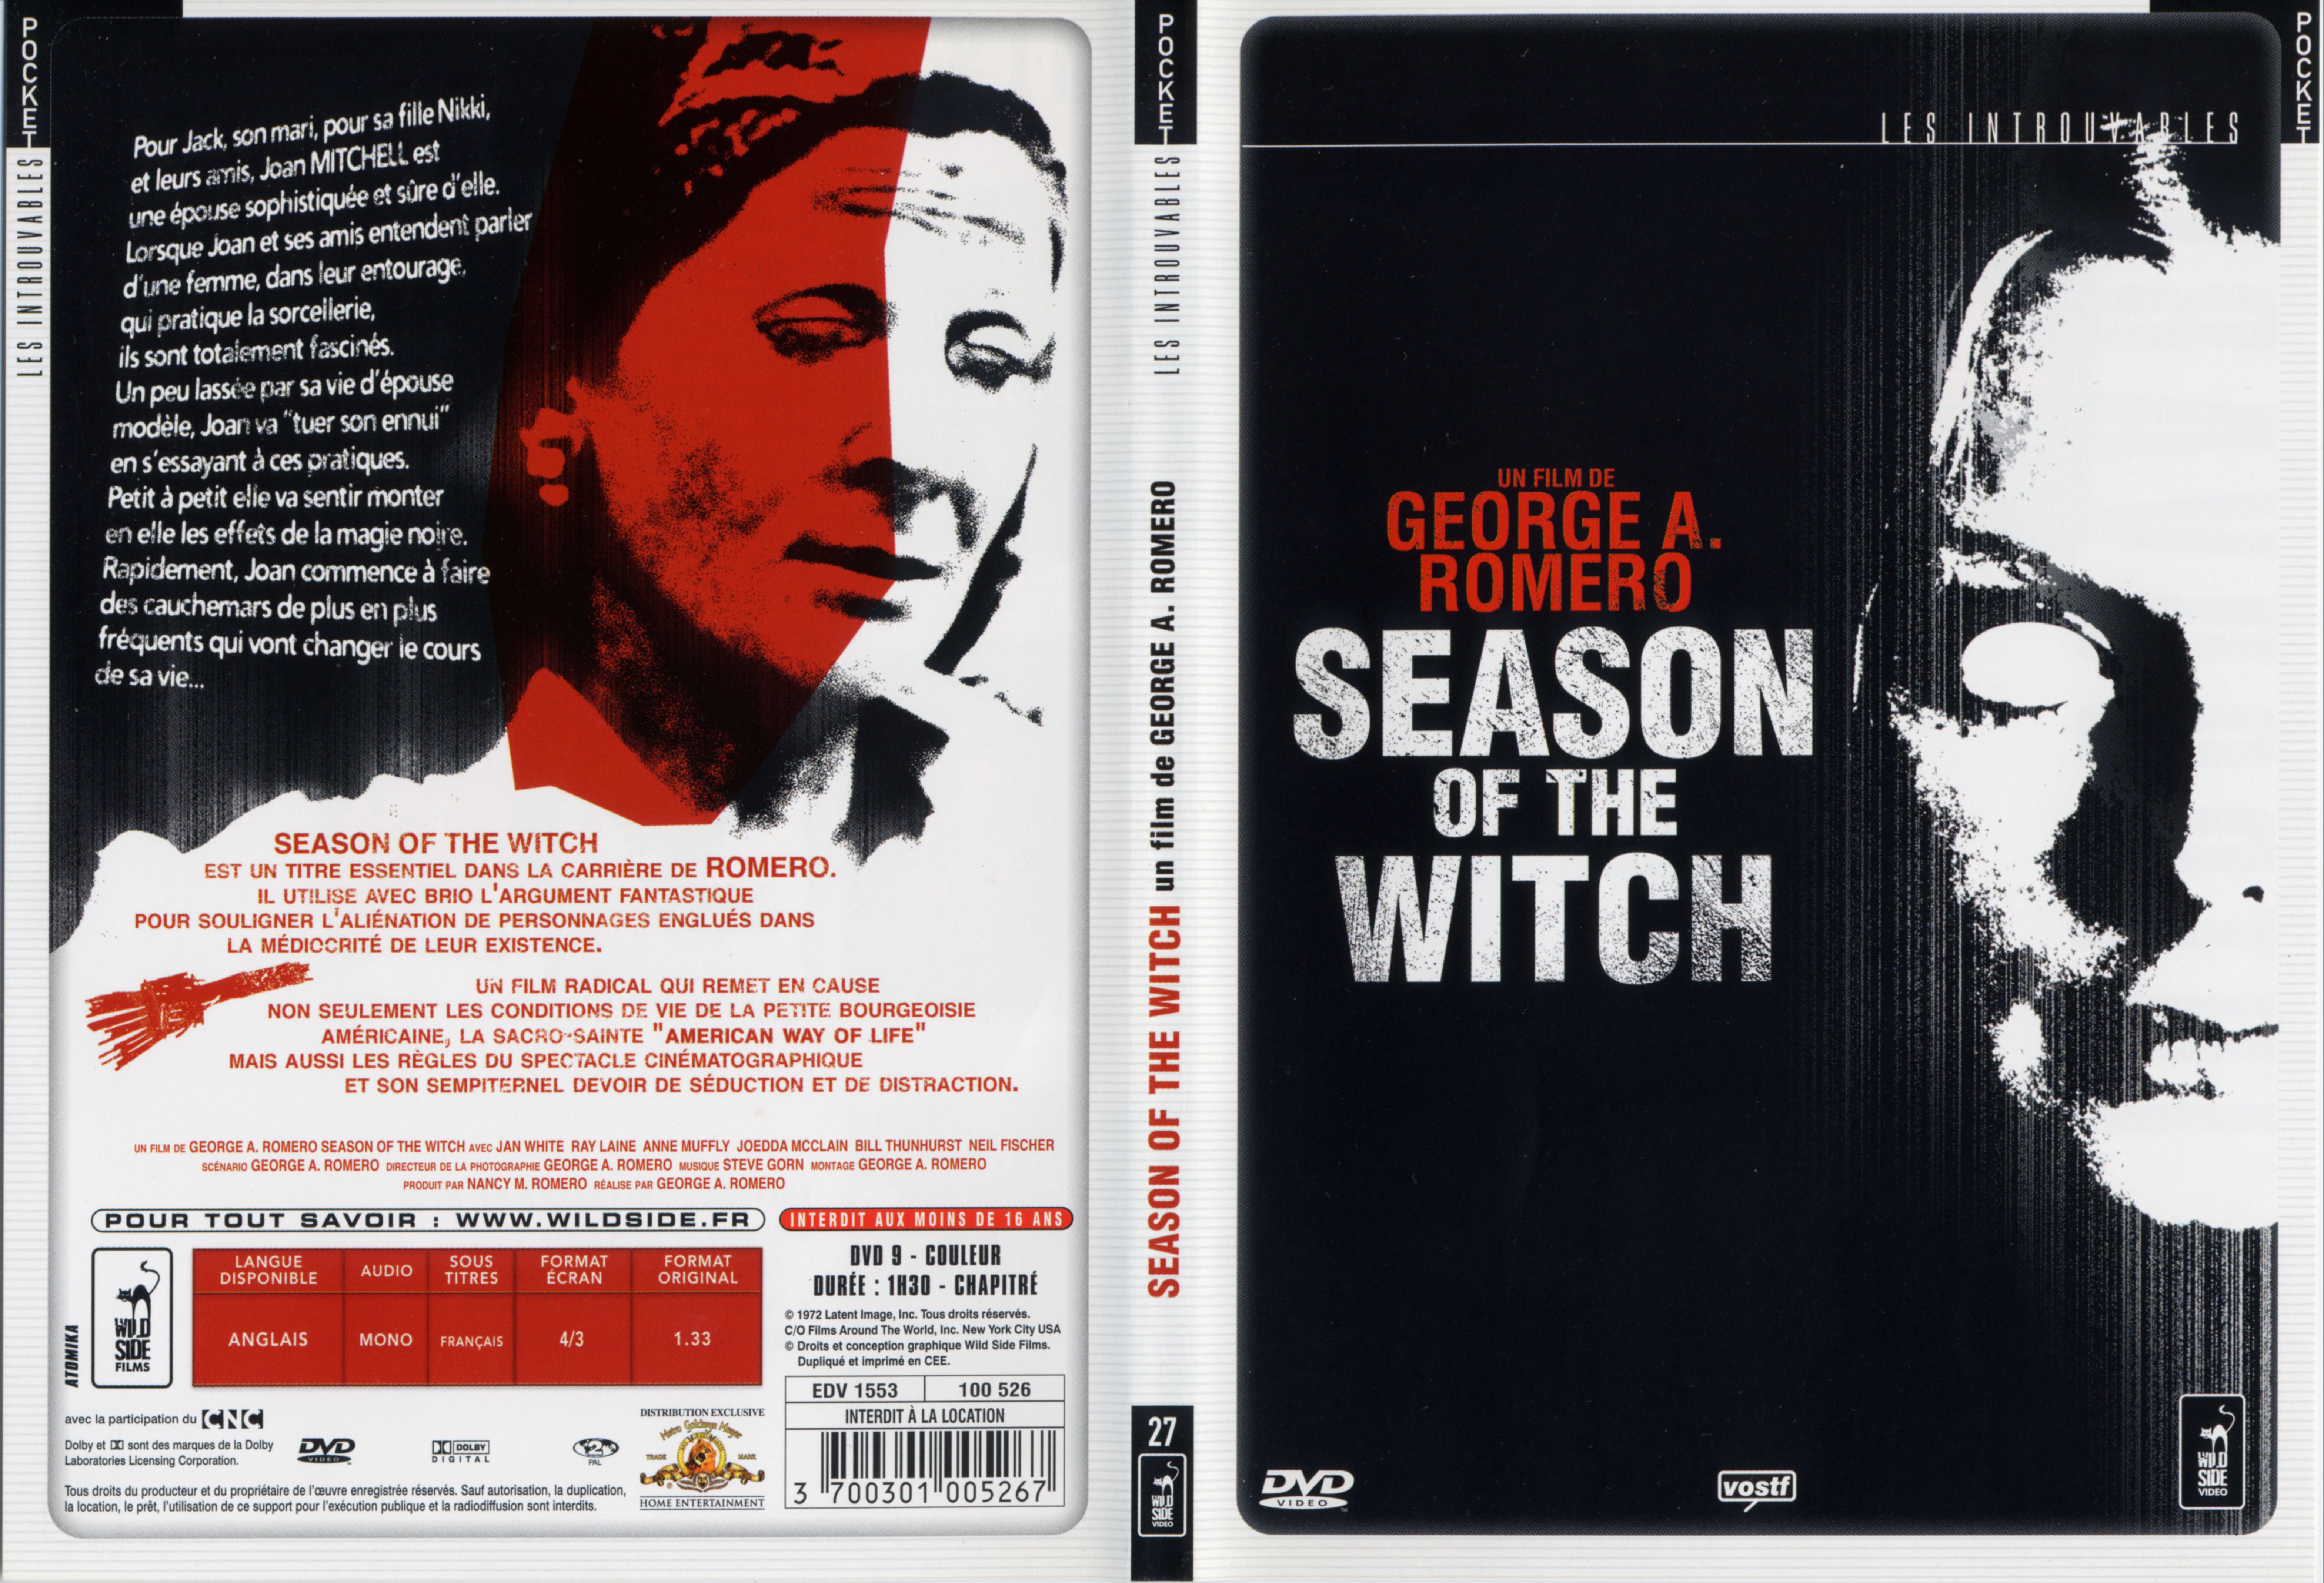 Jaquette DVD Season of the witch